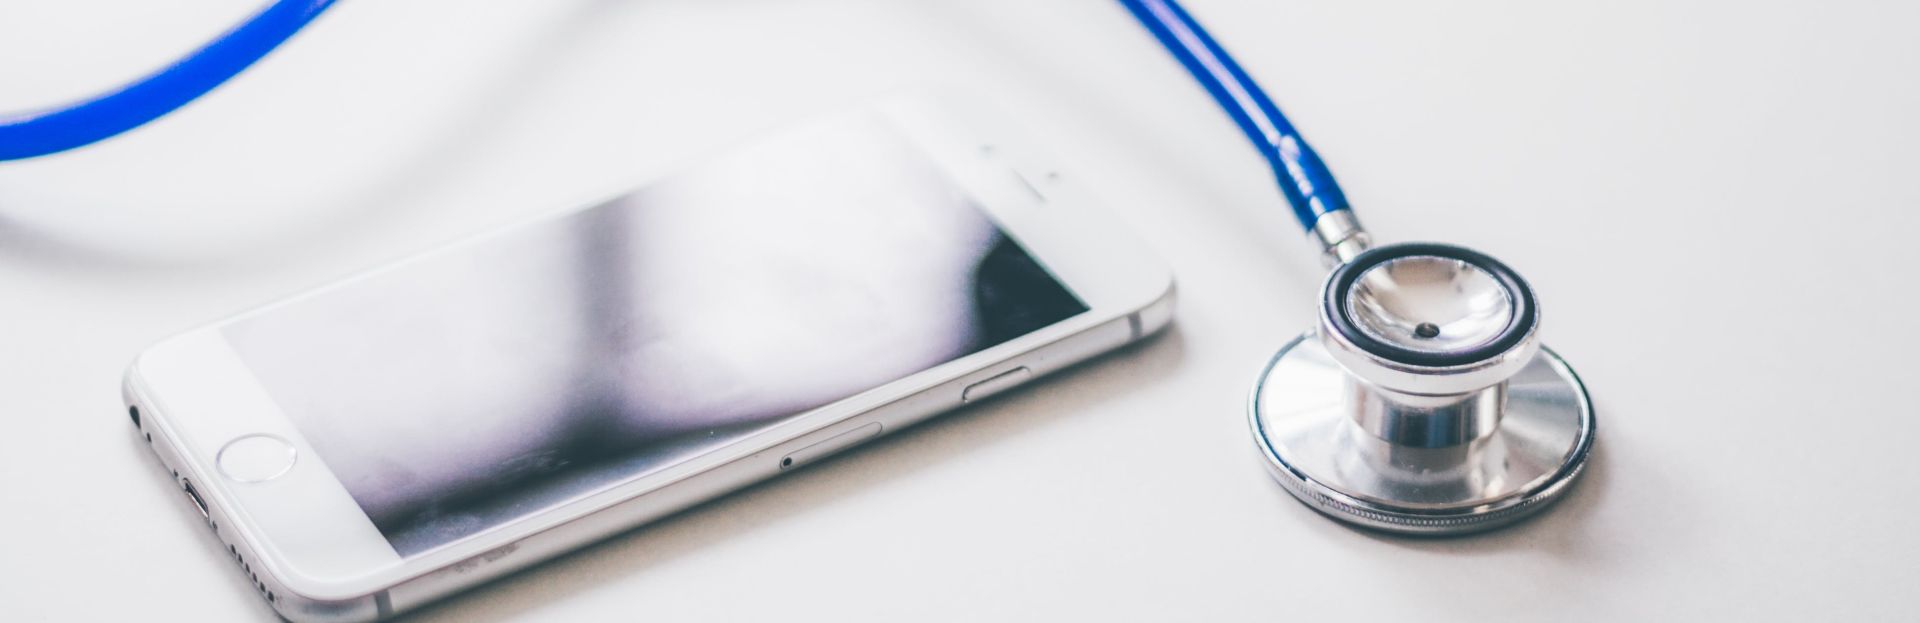 Silver Iphone 6 Near Blue and Silver Stethoscope